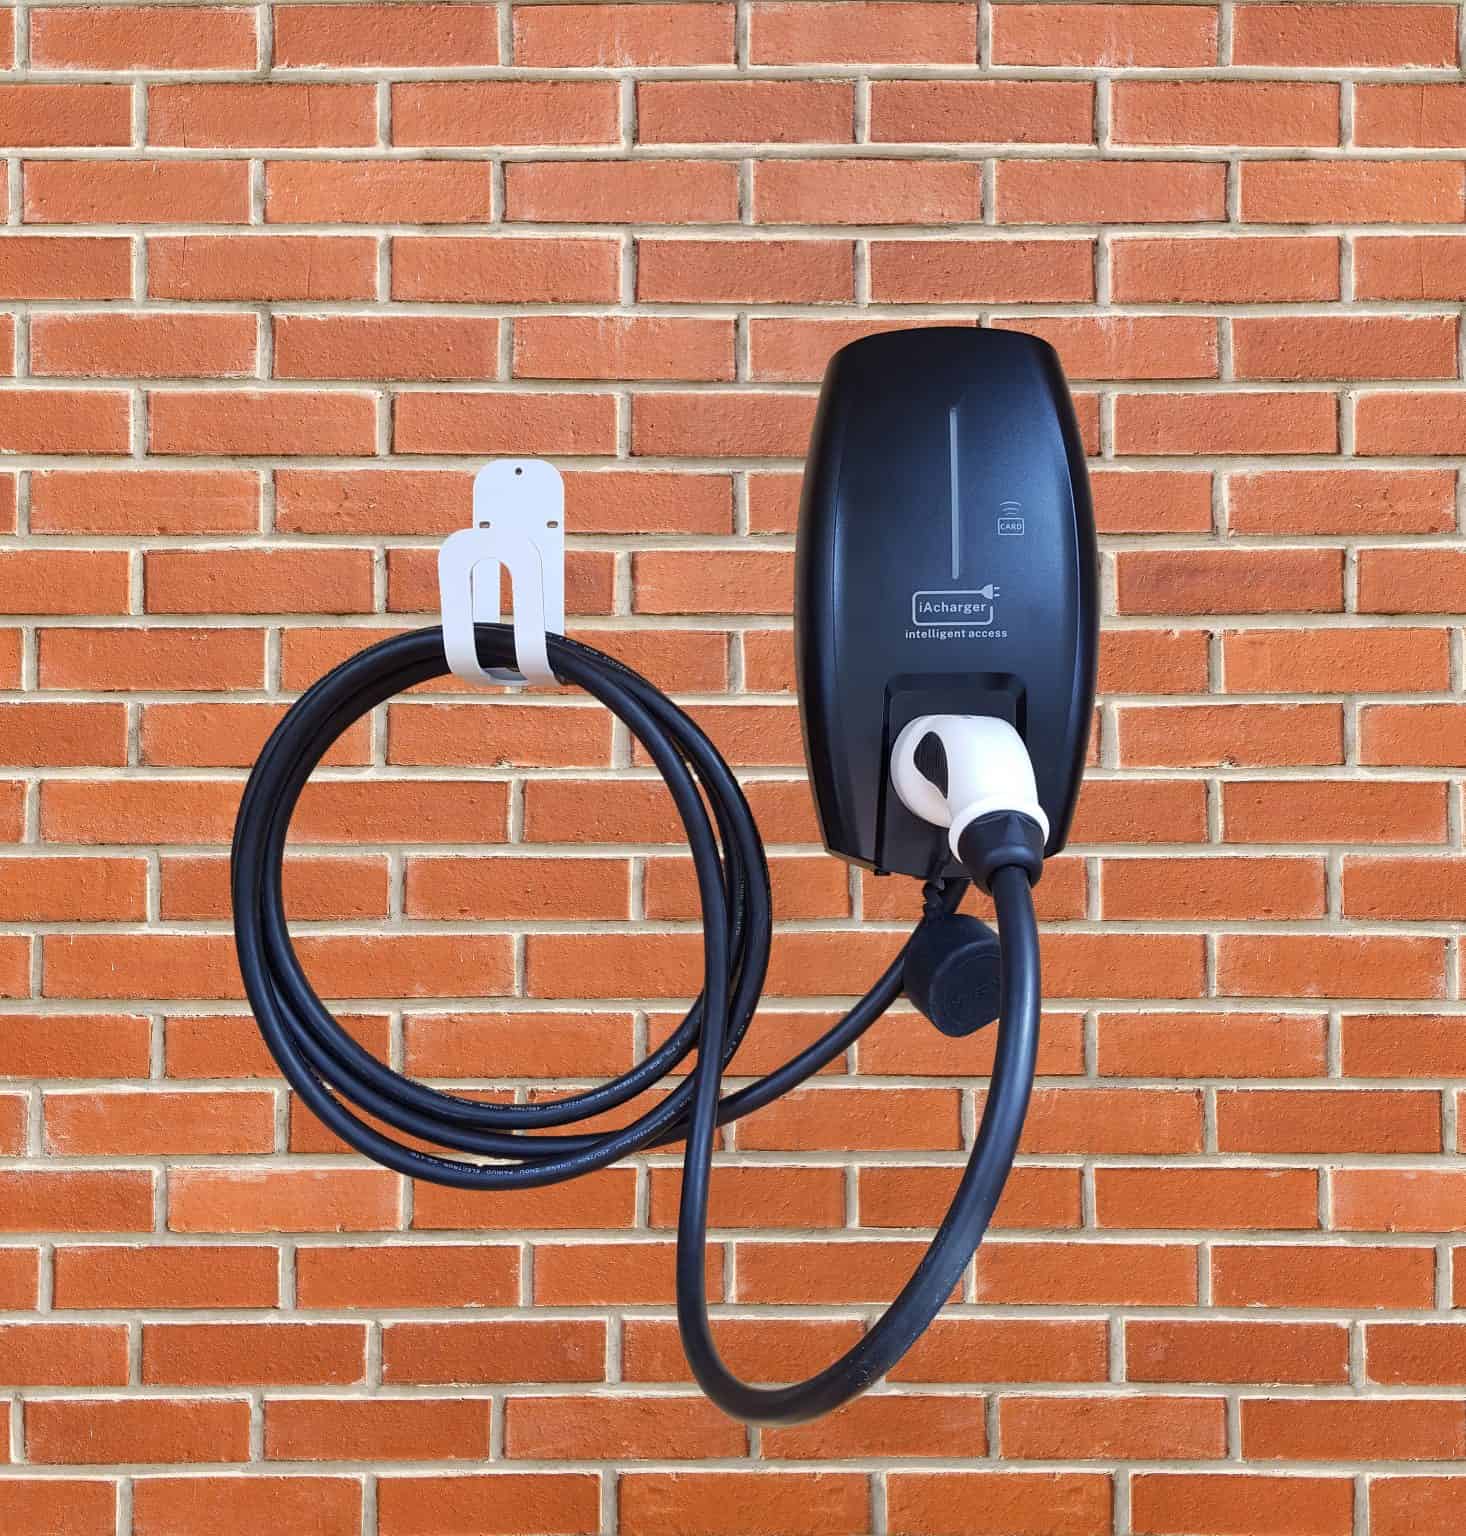 iAccess Limited Release new smart EV home Charger. Motoring Matters